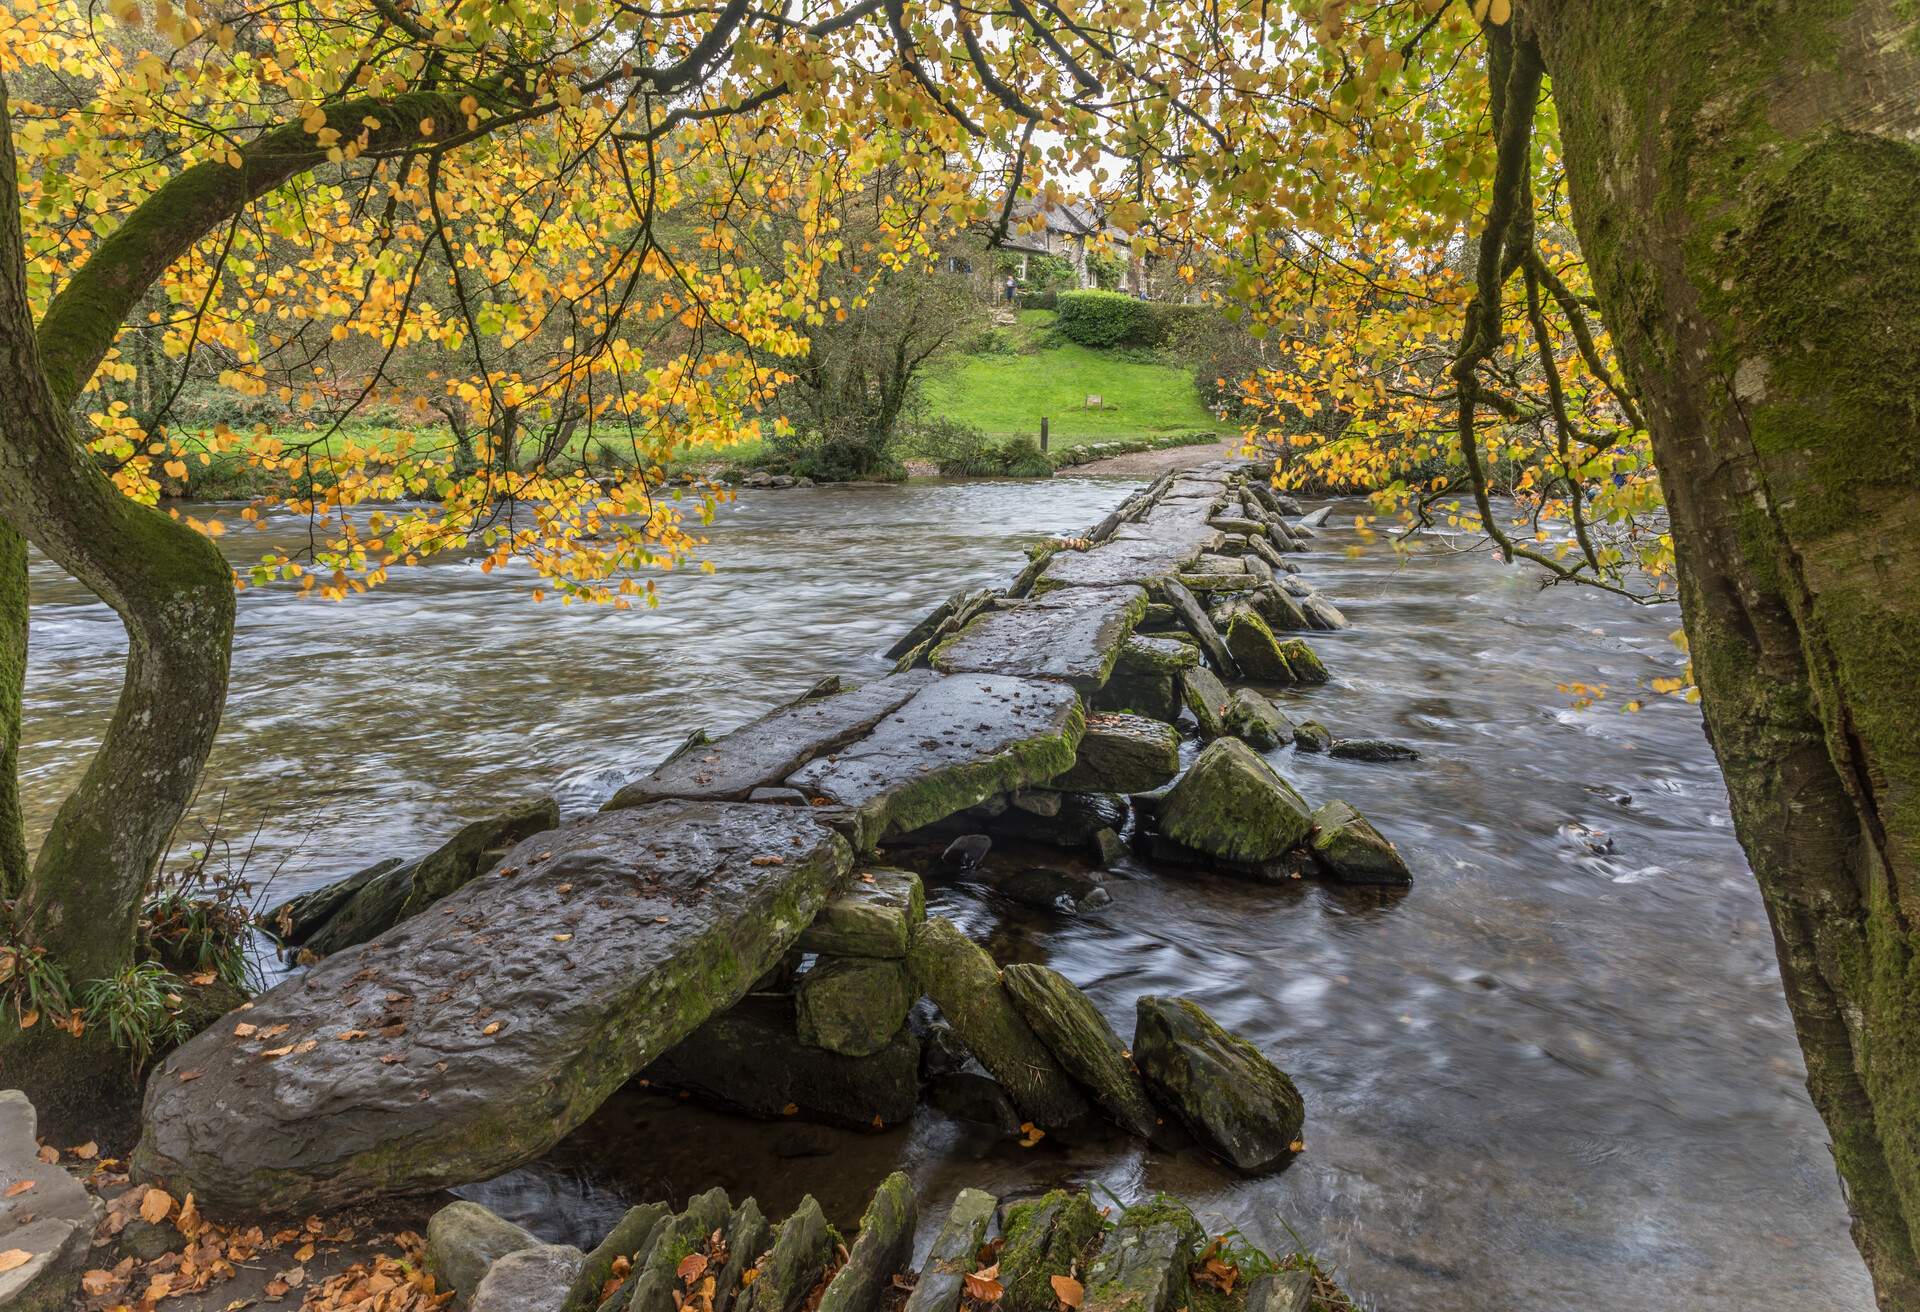 A view of Tarr Steps, a clapper bridge across the river Barle in the Exmoor National Park, Somerset, England.